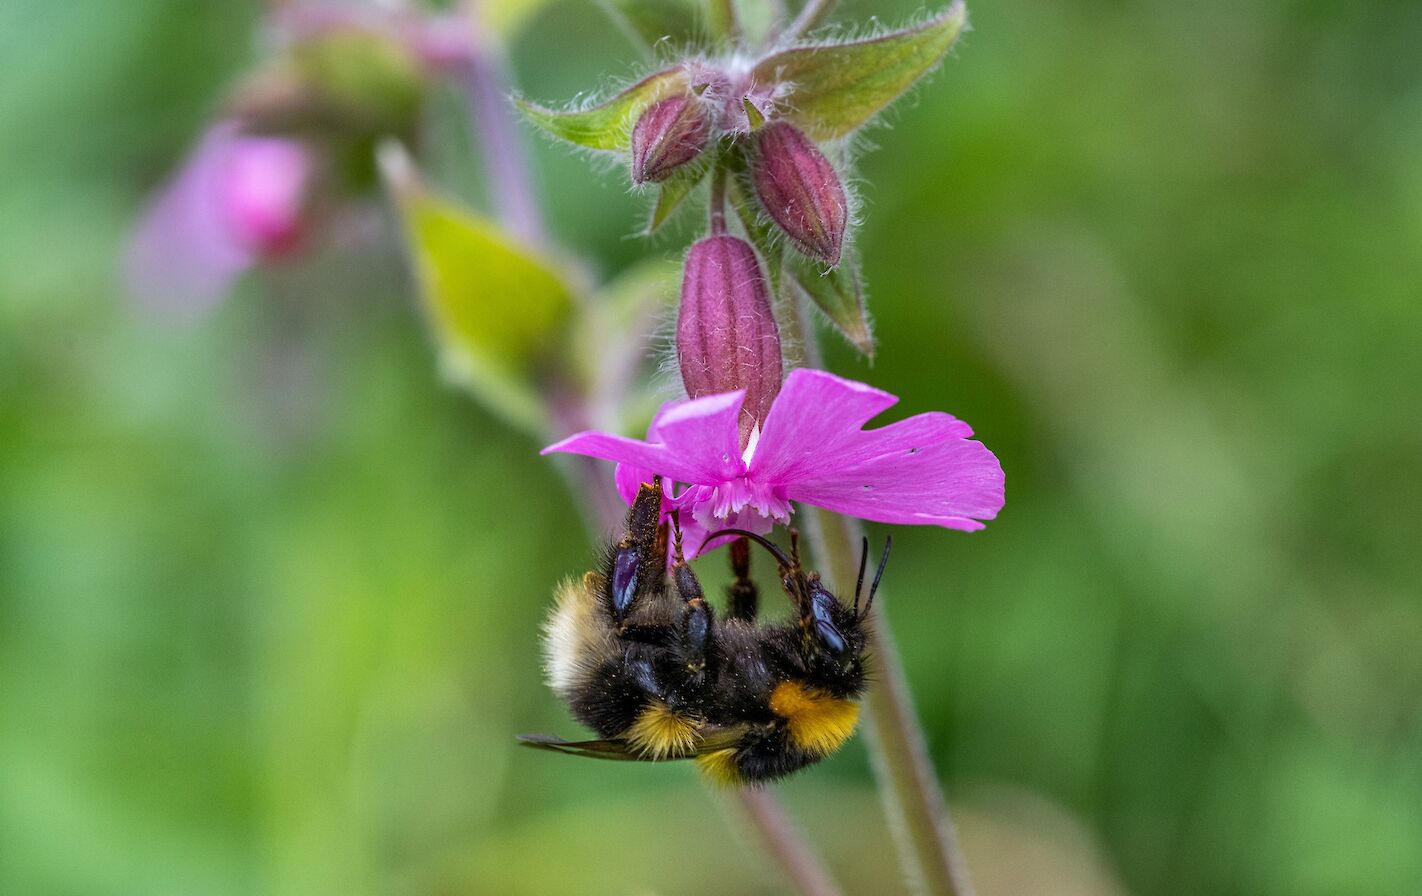 Bumblebee and red campion - image by Raymond Besant